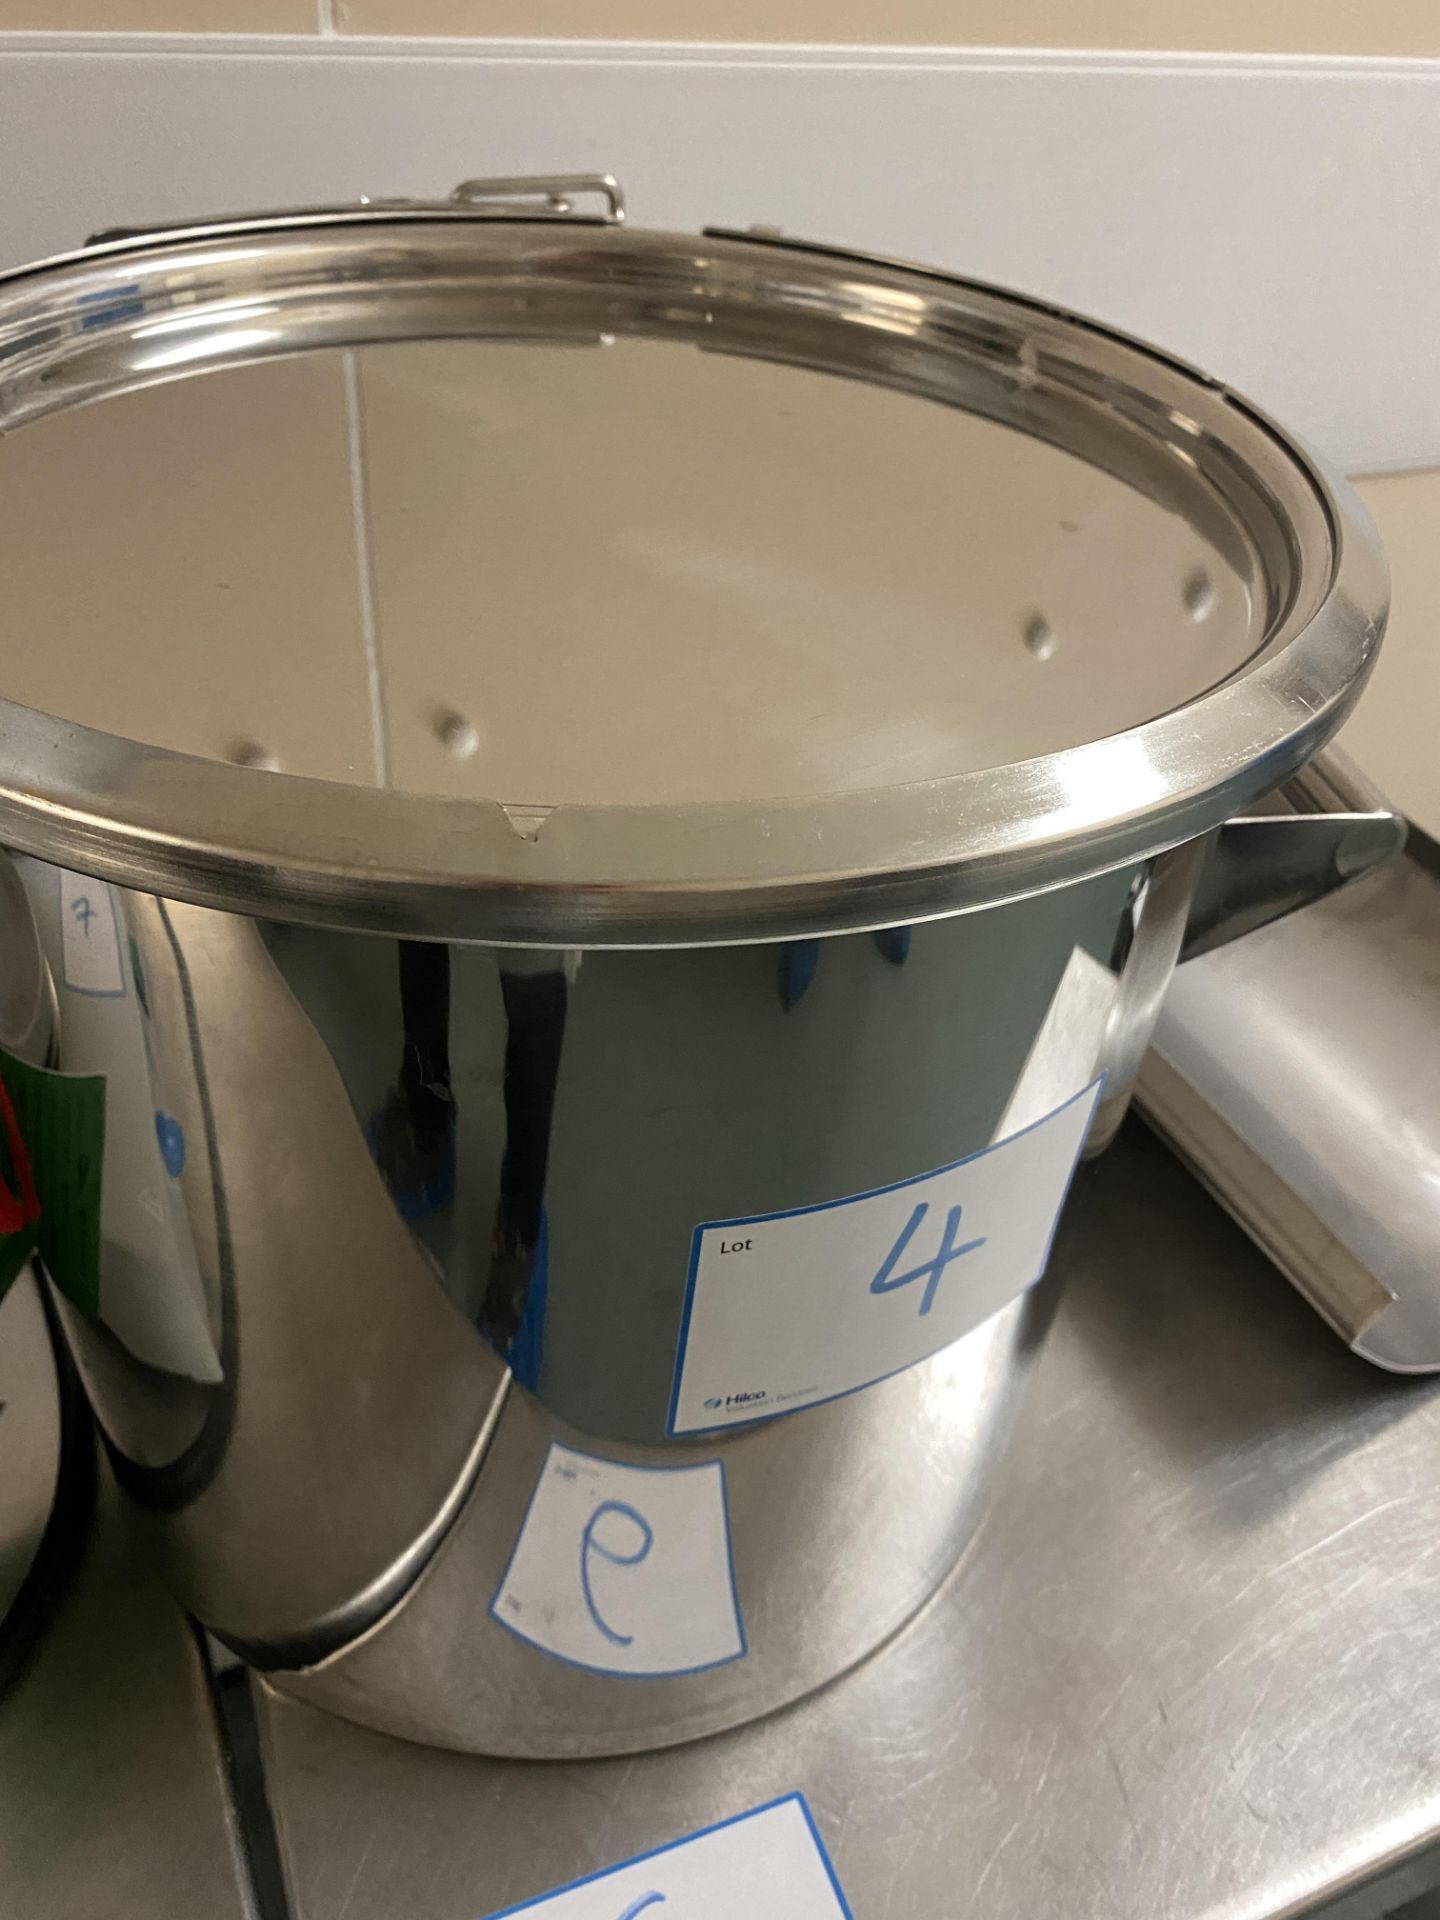 1, Velp RC2 Heating Plate, 2: Stainless Steel Buckets, 4: Small Stainless Steel Jugs - Image 2 of 4